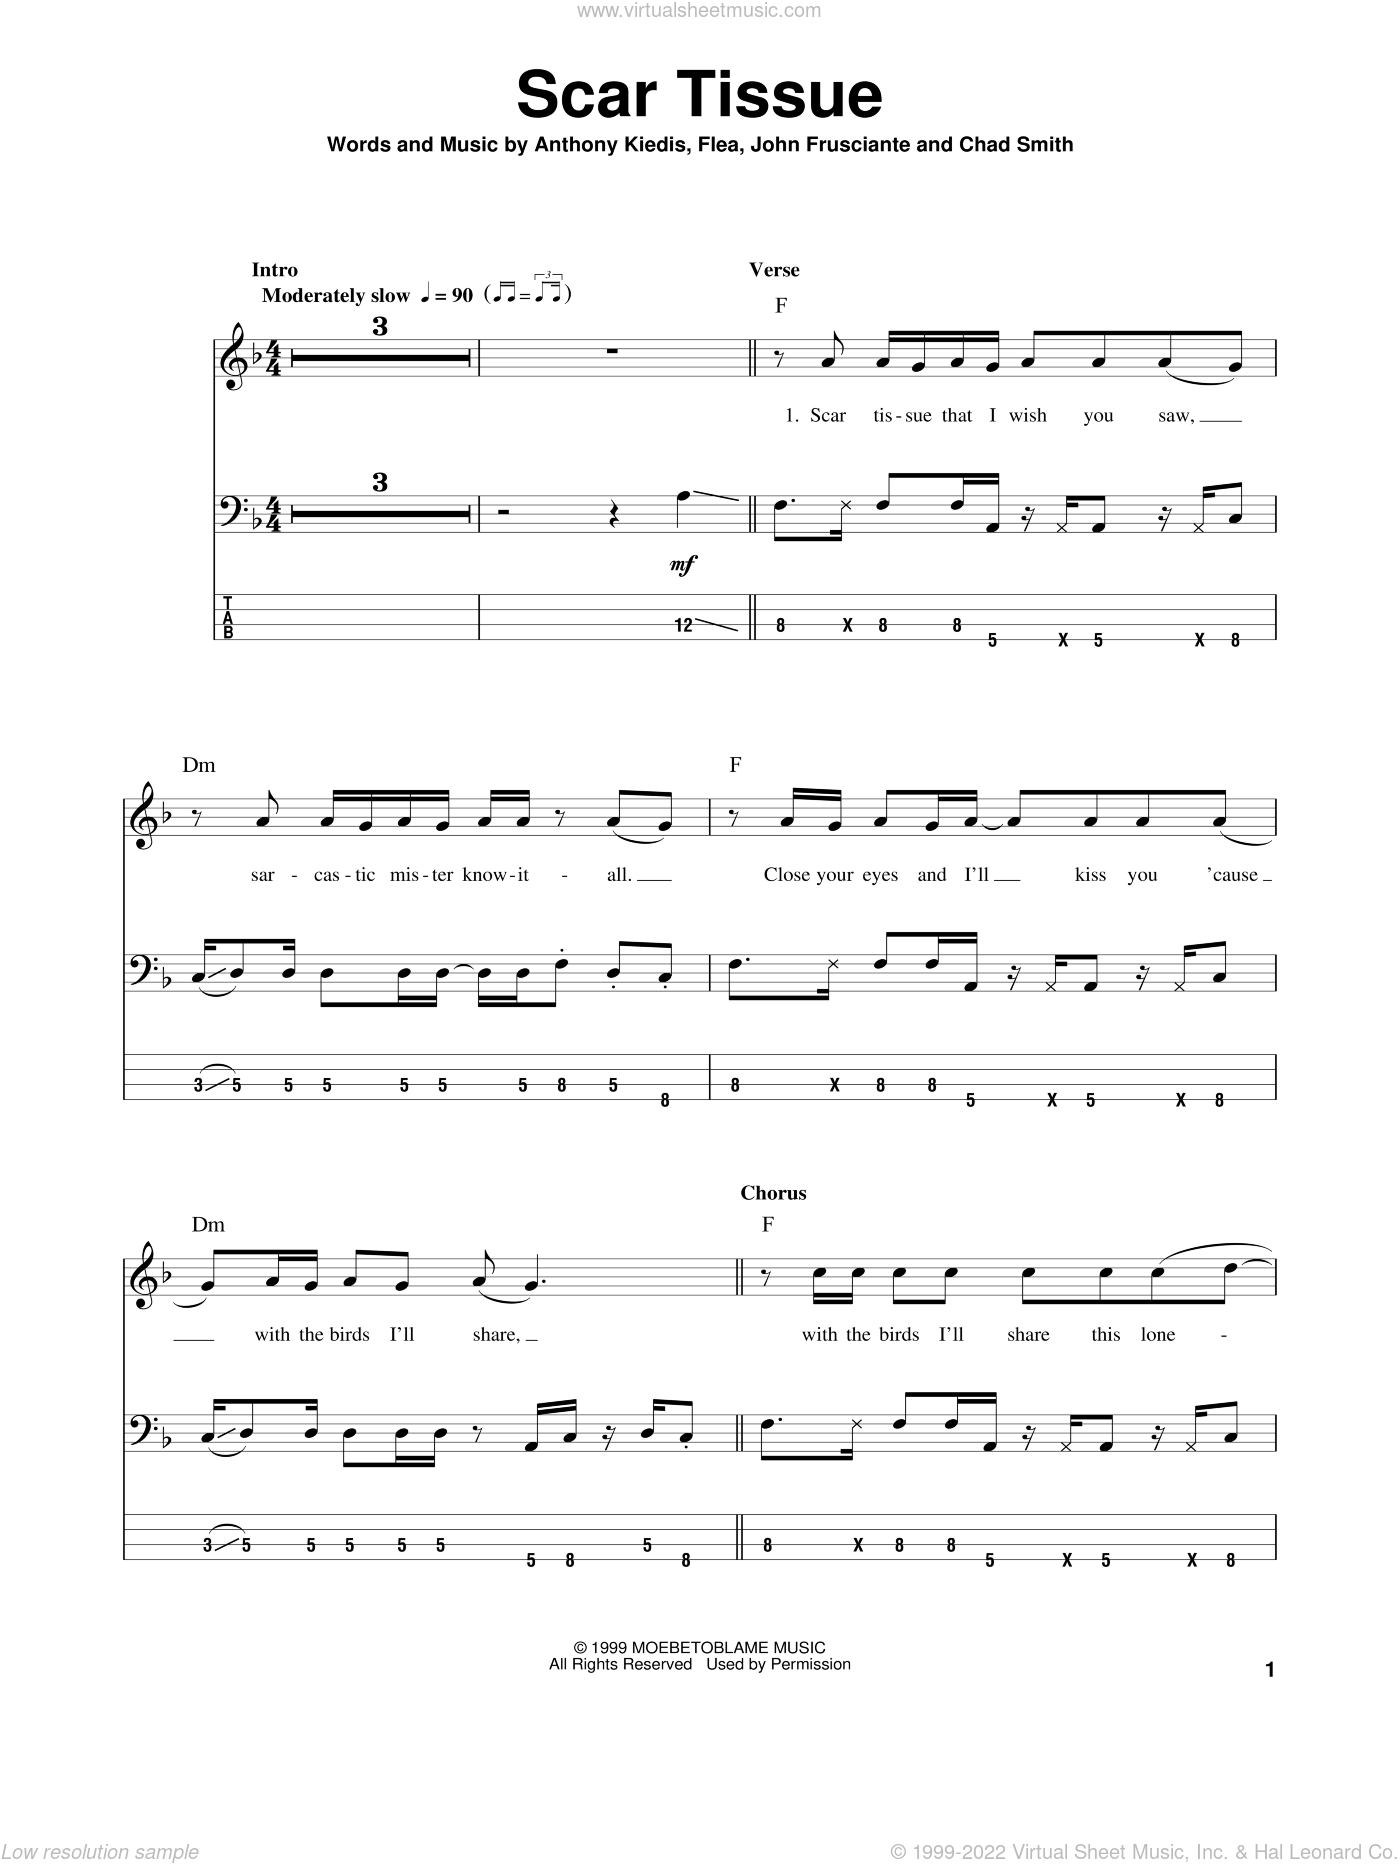 Scar Tissue by Red Hot Chili Peppers - Guitar Lead Sheet - Guitar ...